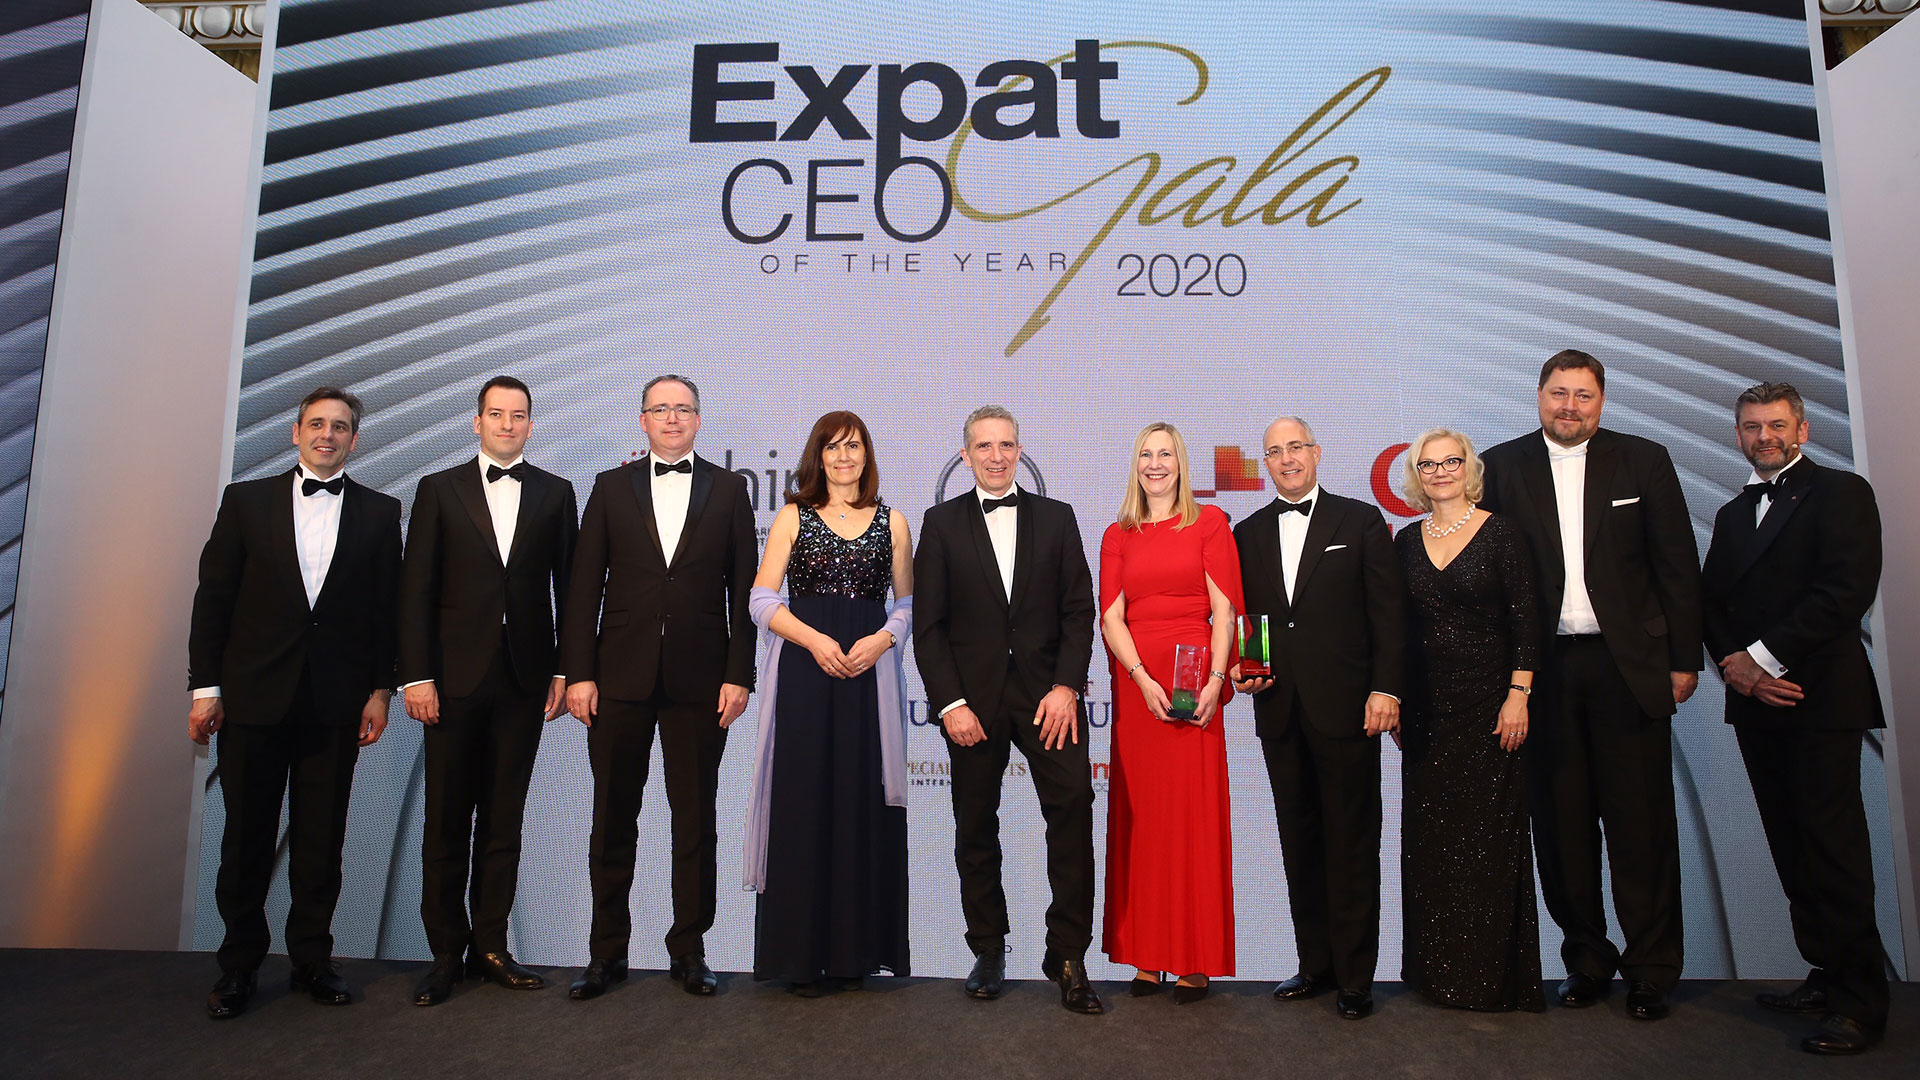 The Expat CEO of the Year prize was awarded to Ms Melanie Seymour